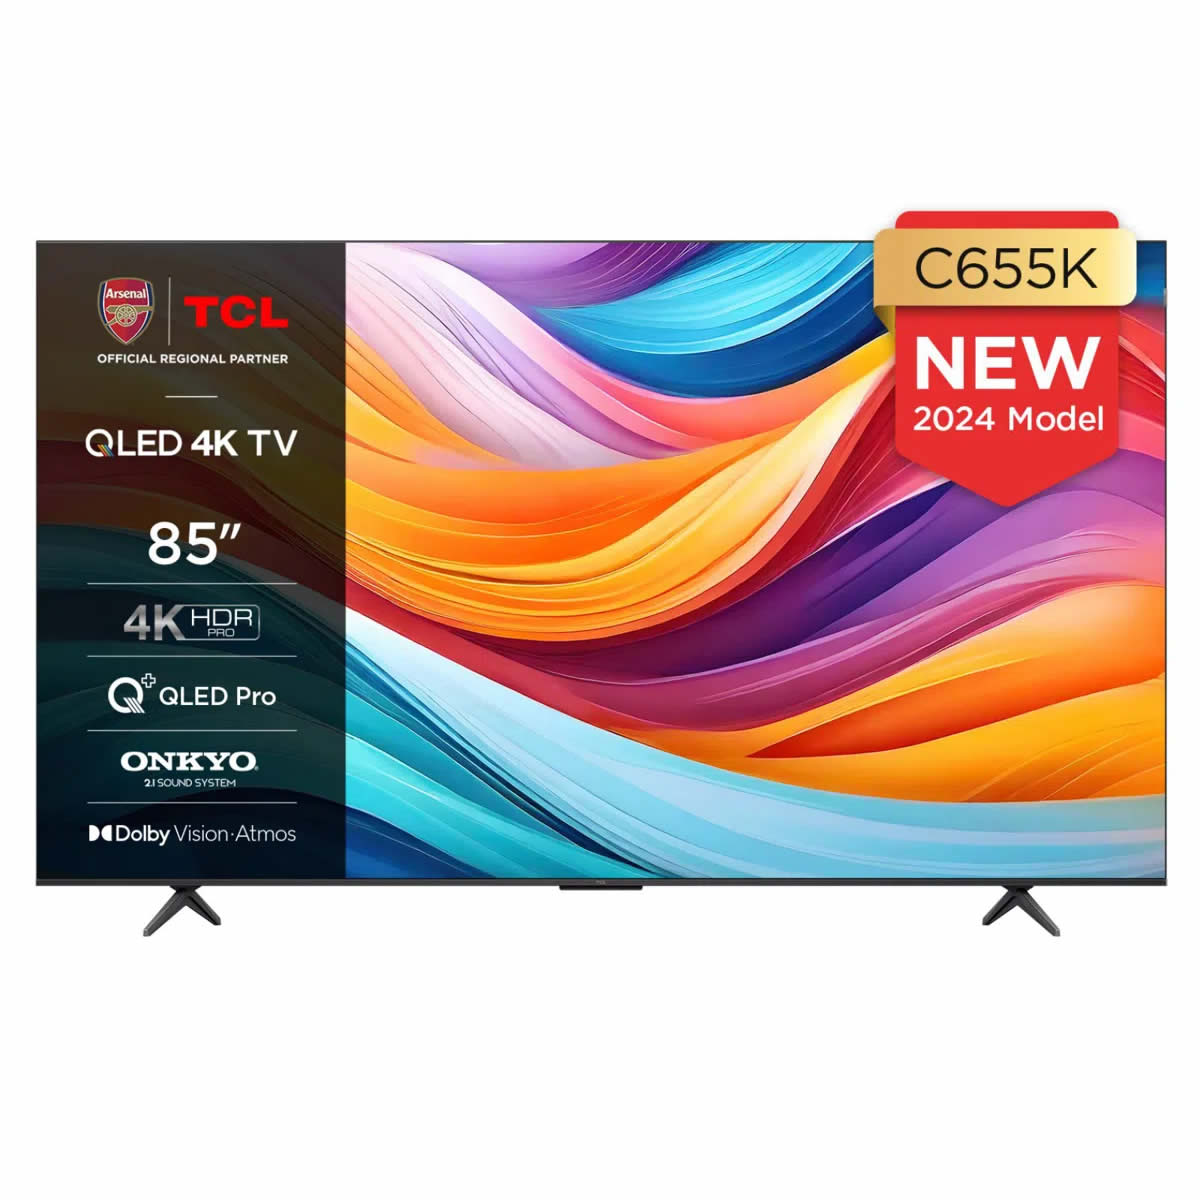 TCL 85inch 4K QLED PRO SMART TV WiFi Freeview HD Google